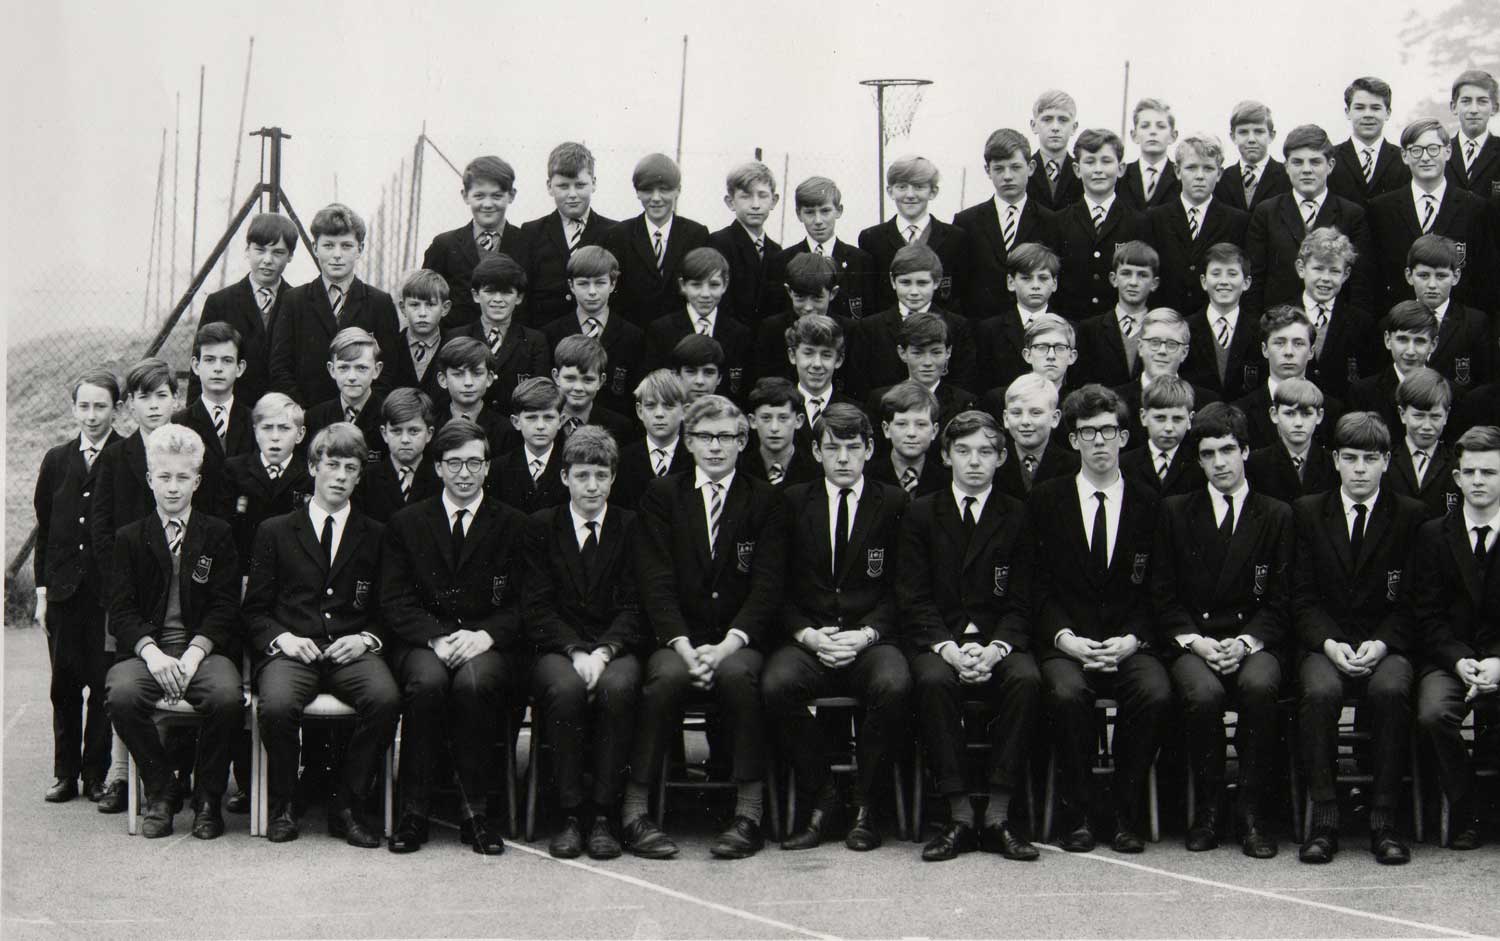 A photo of section1 of the Bells Grammar School photo from 1965 - section 1